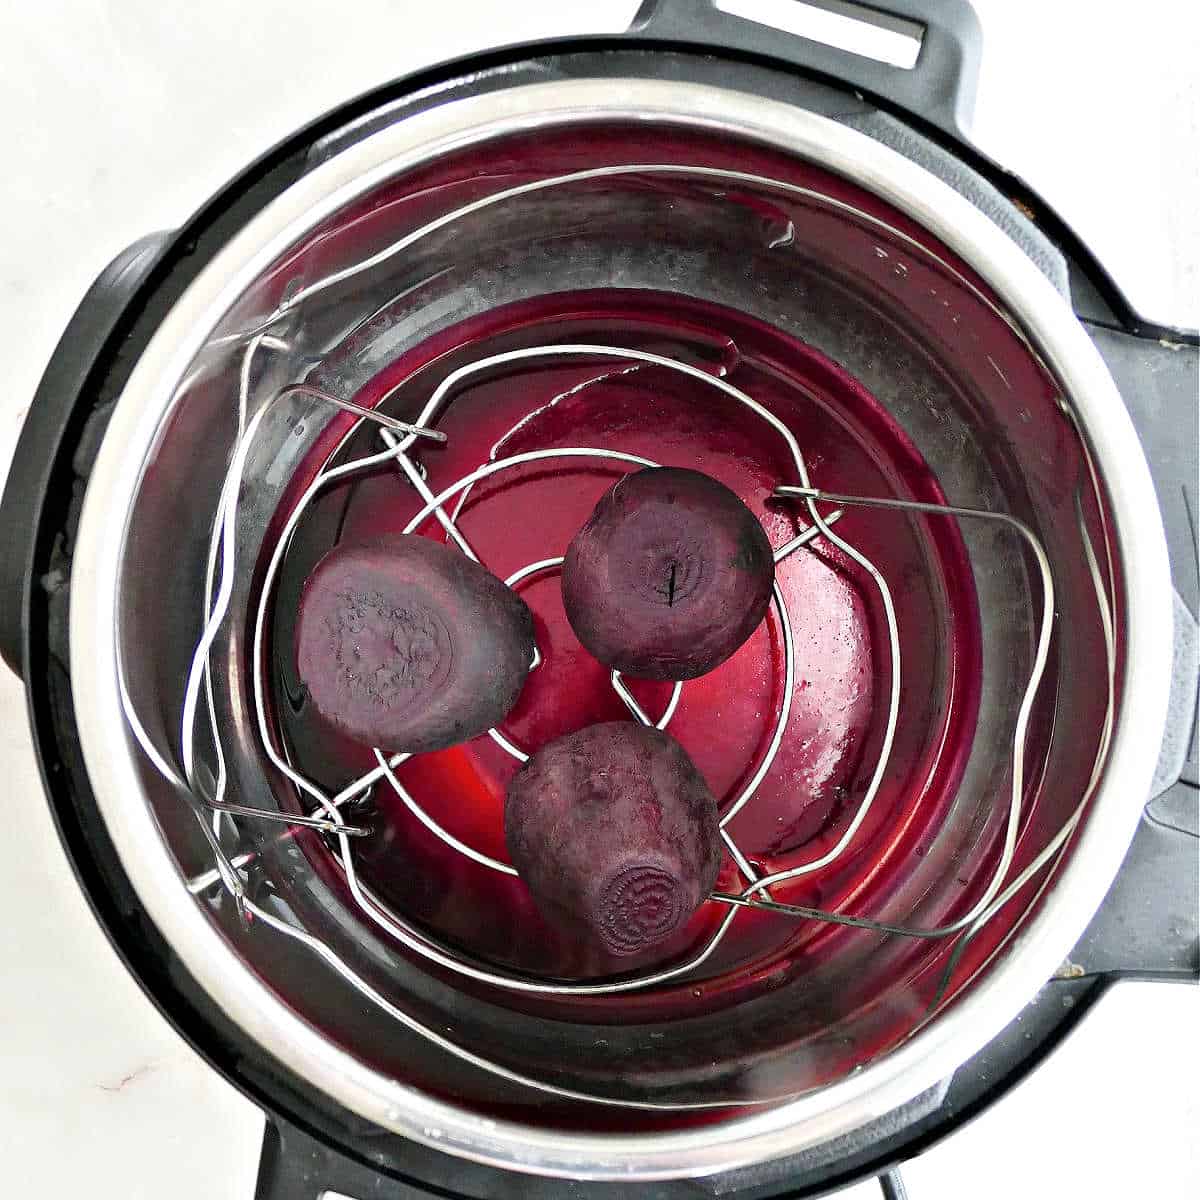 3 red beets in an Instant Pot after being cooked